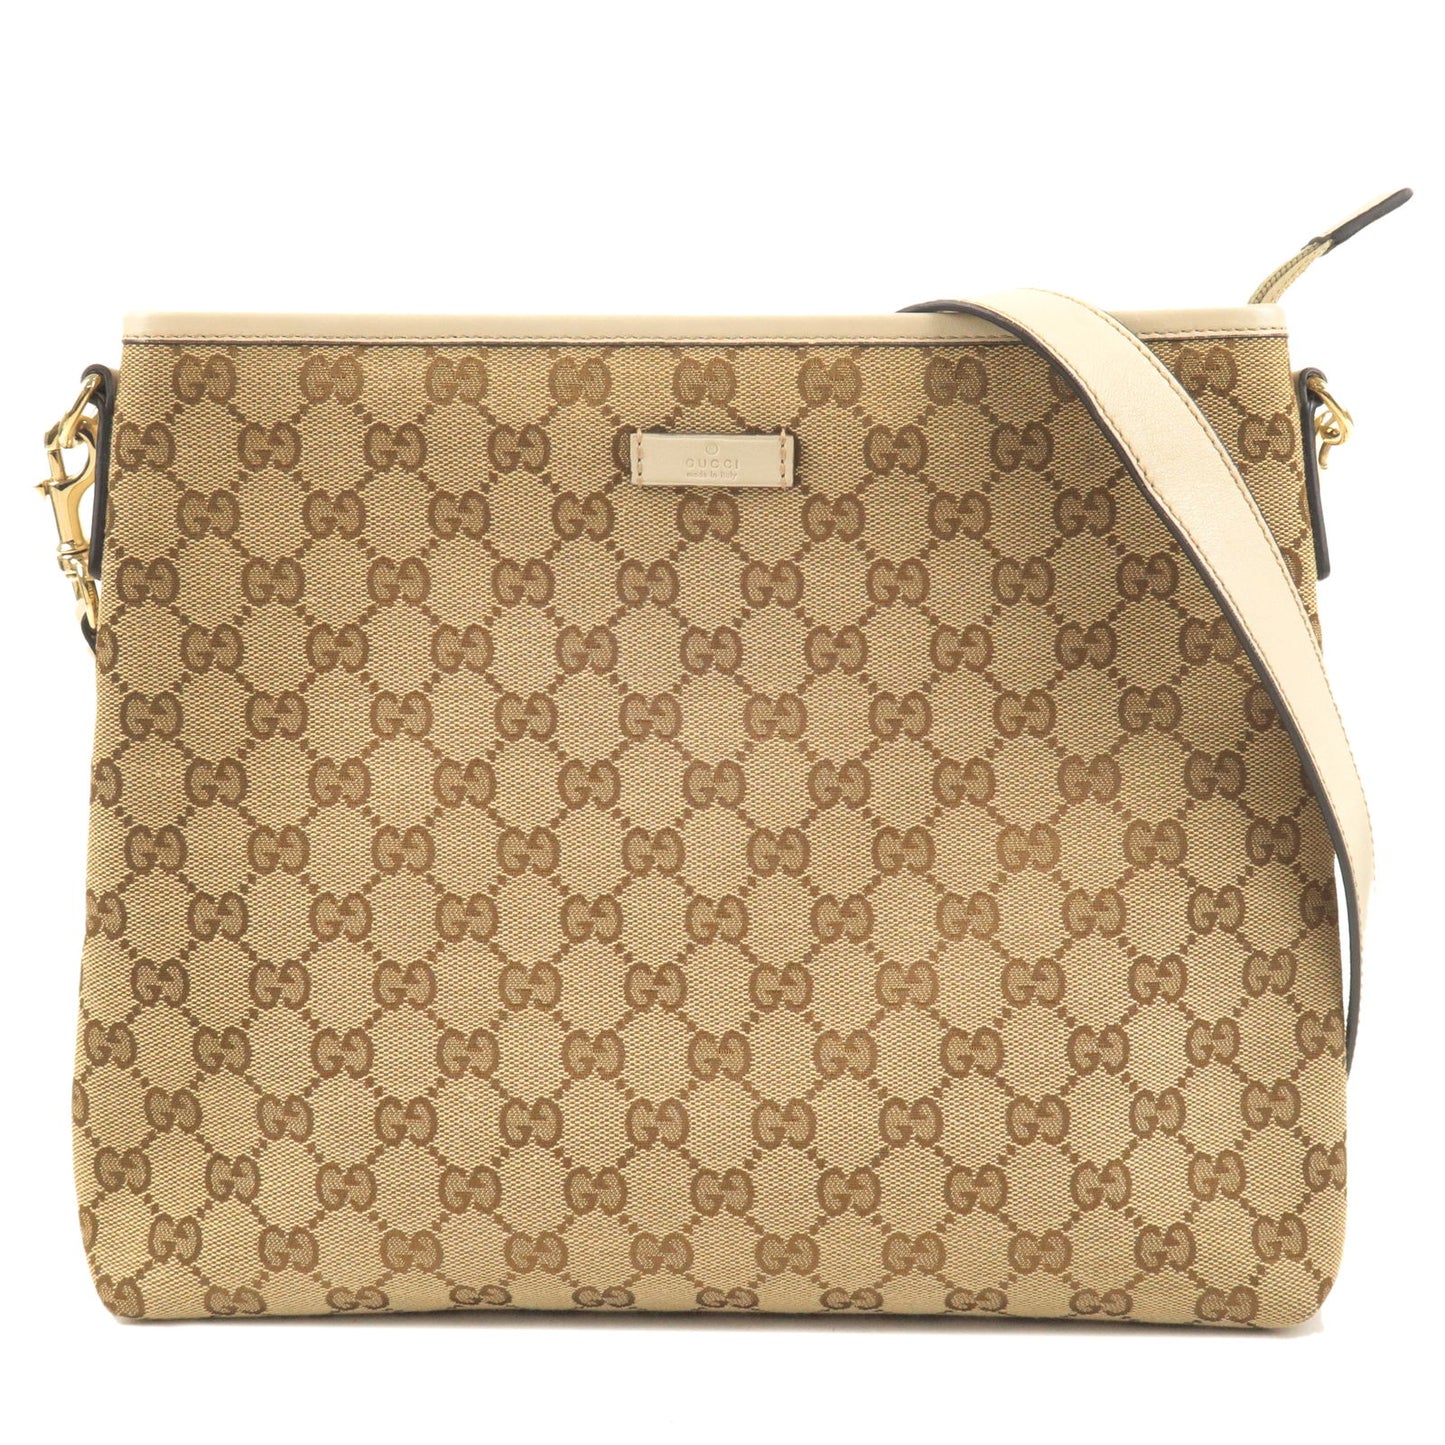 GUCCI-GG-Canvas-Leather-Shouler-Bag-Beige-Brown-388924